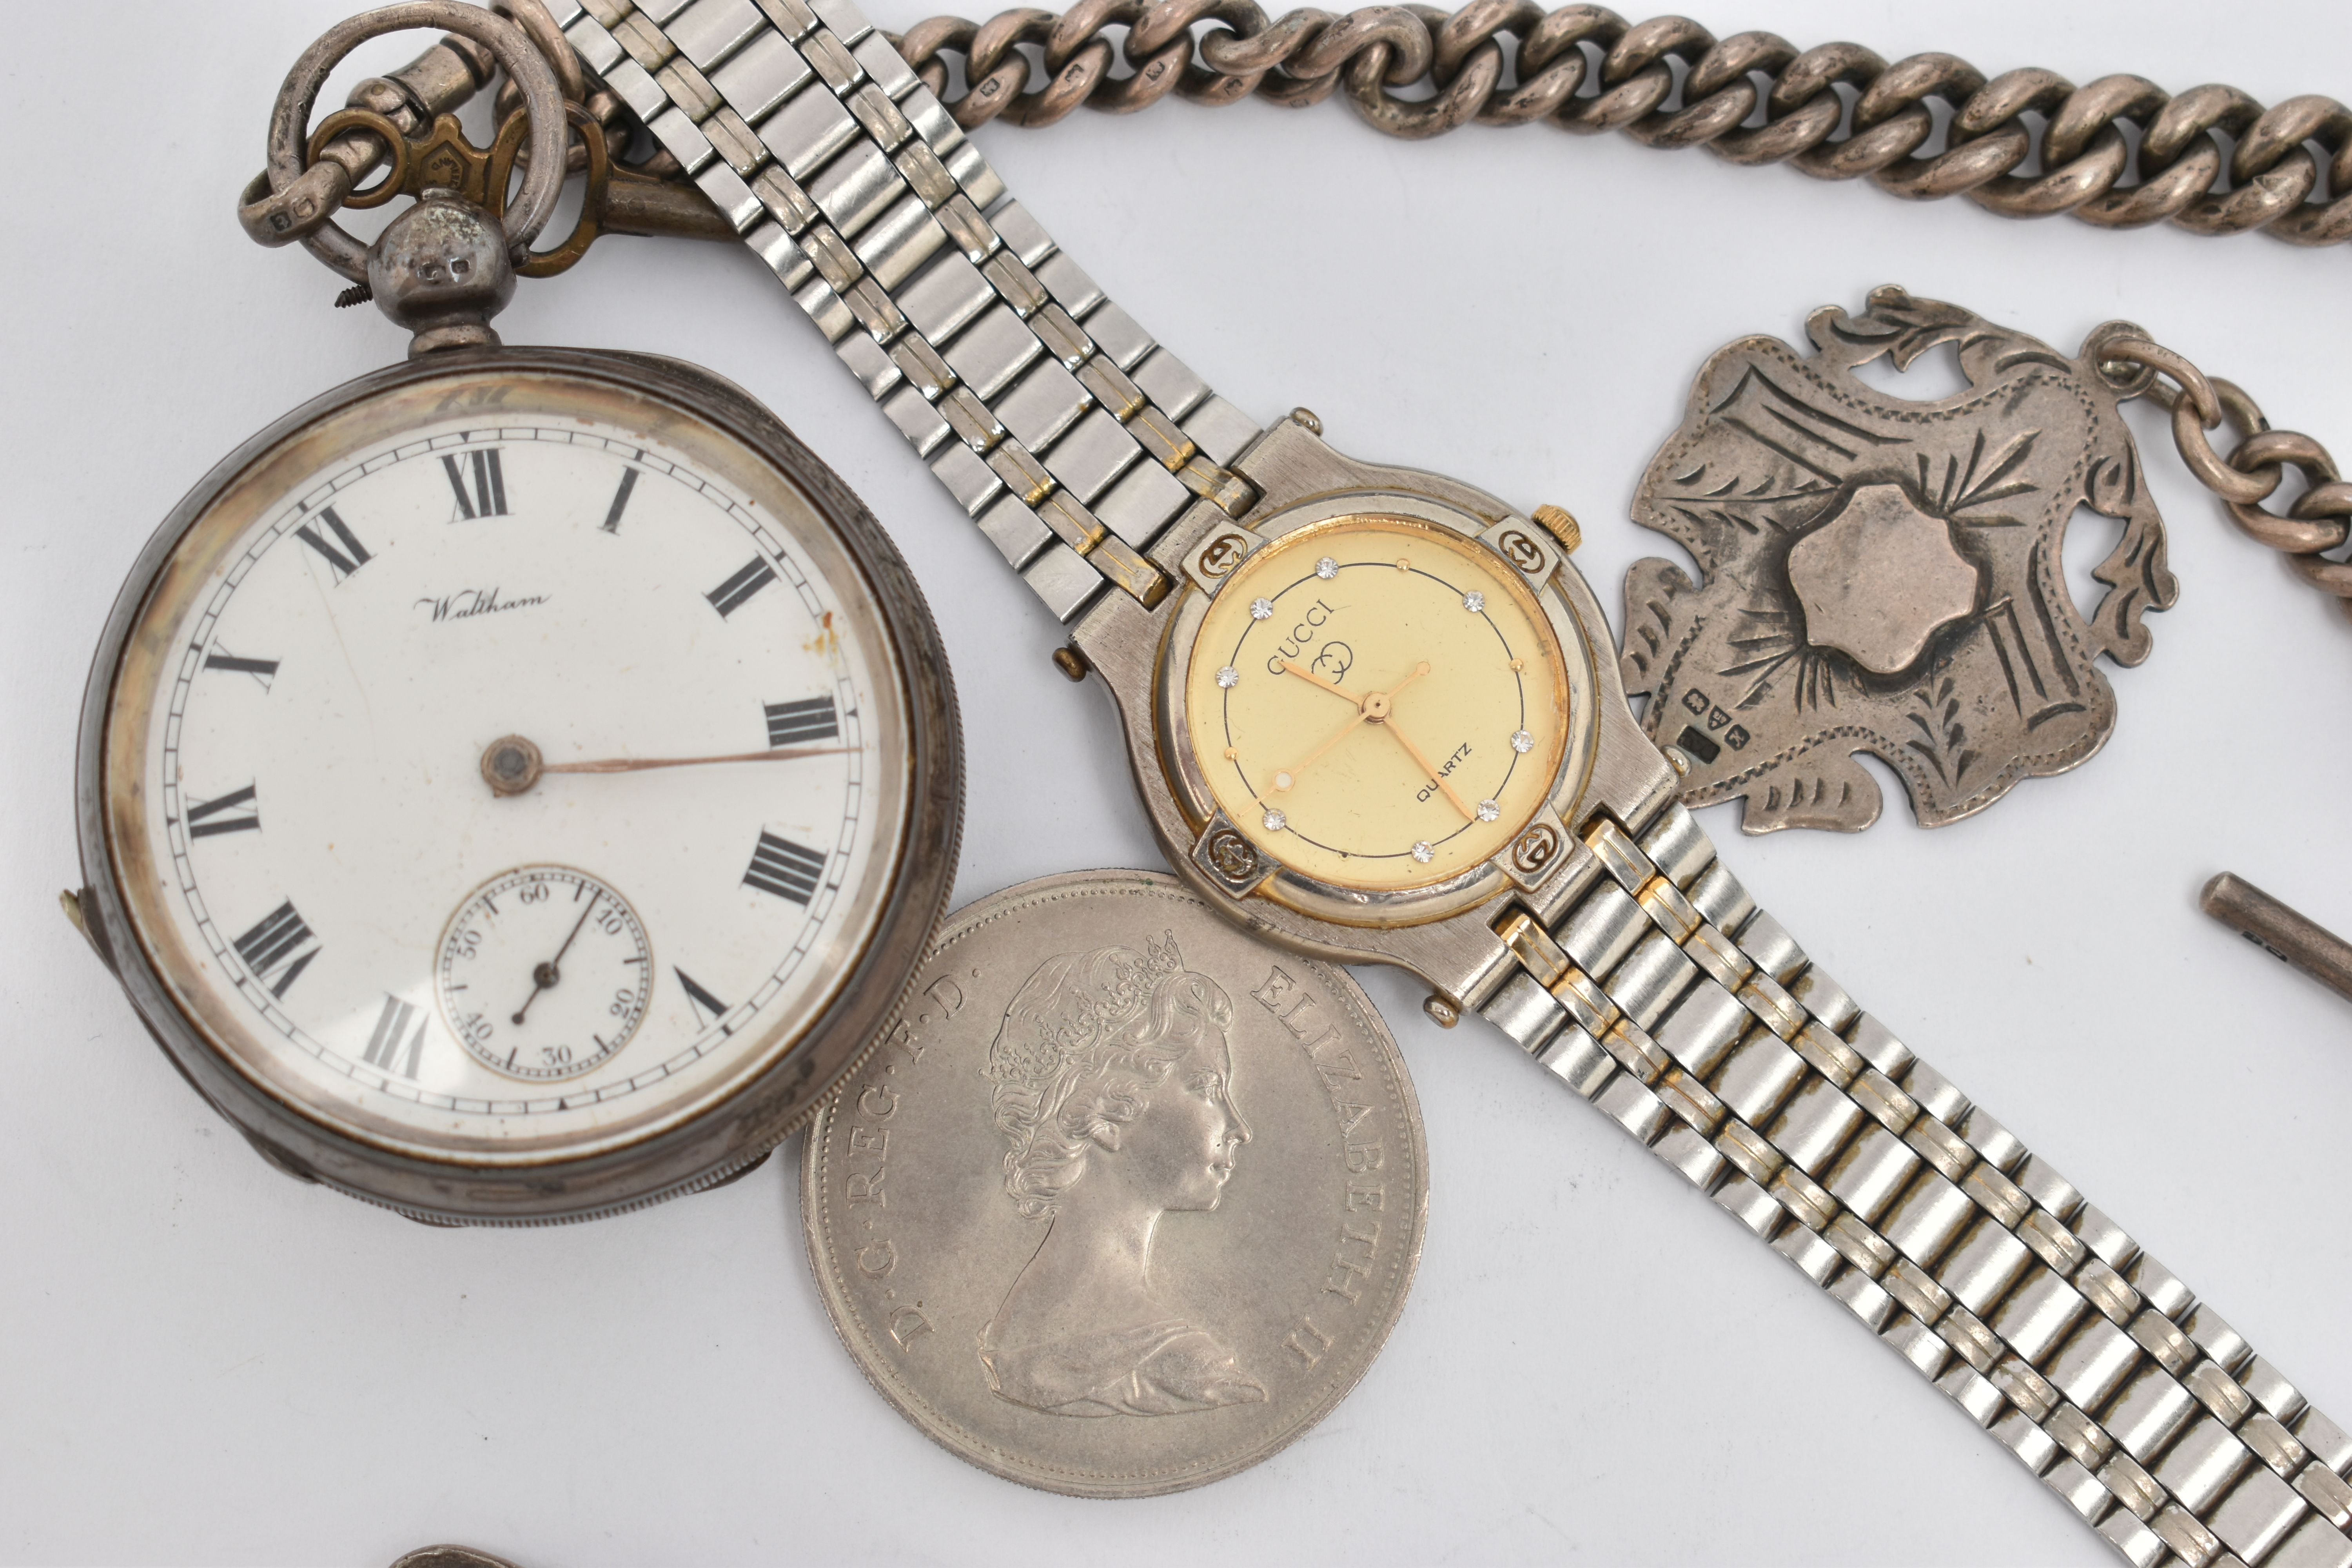 A SILVER 'WALTHAM' POCKET WATCH AND ALBERT CHAIN, key wound, open face pocket watch, round white - Image 2 of 4